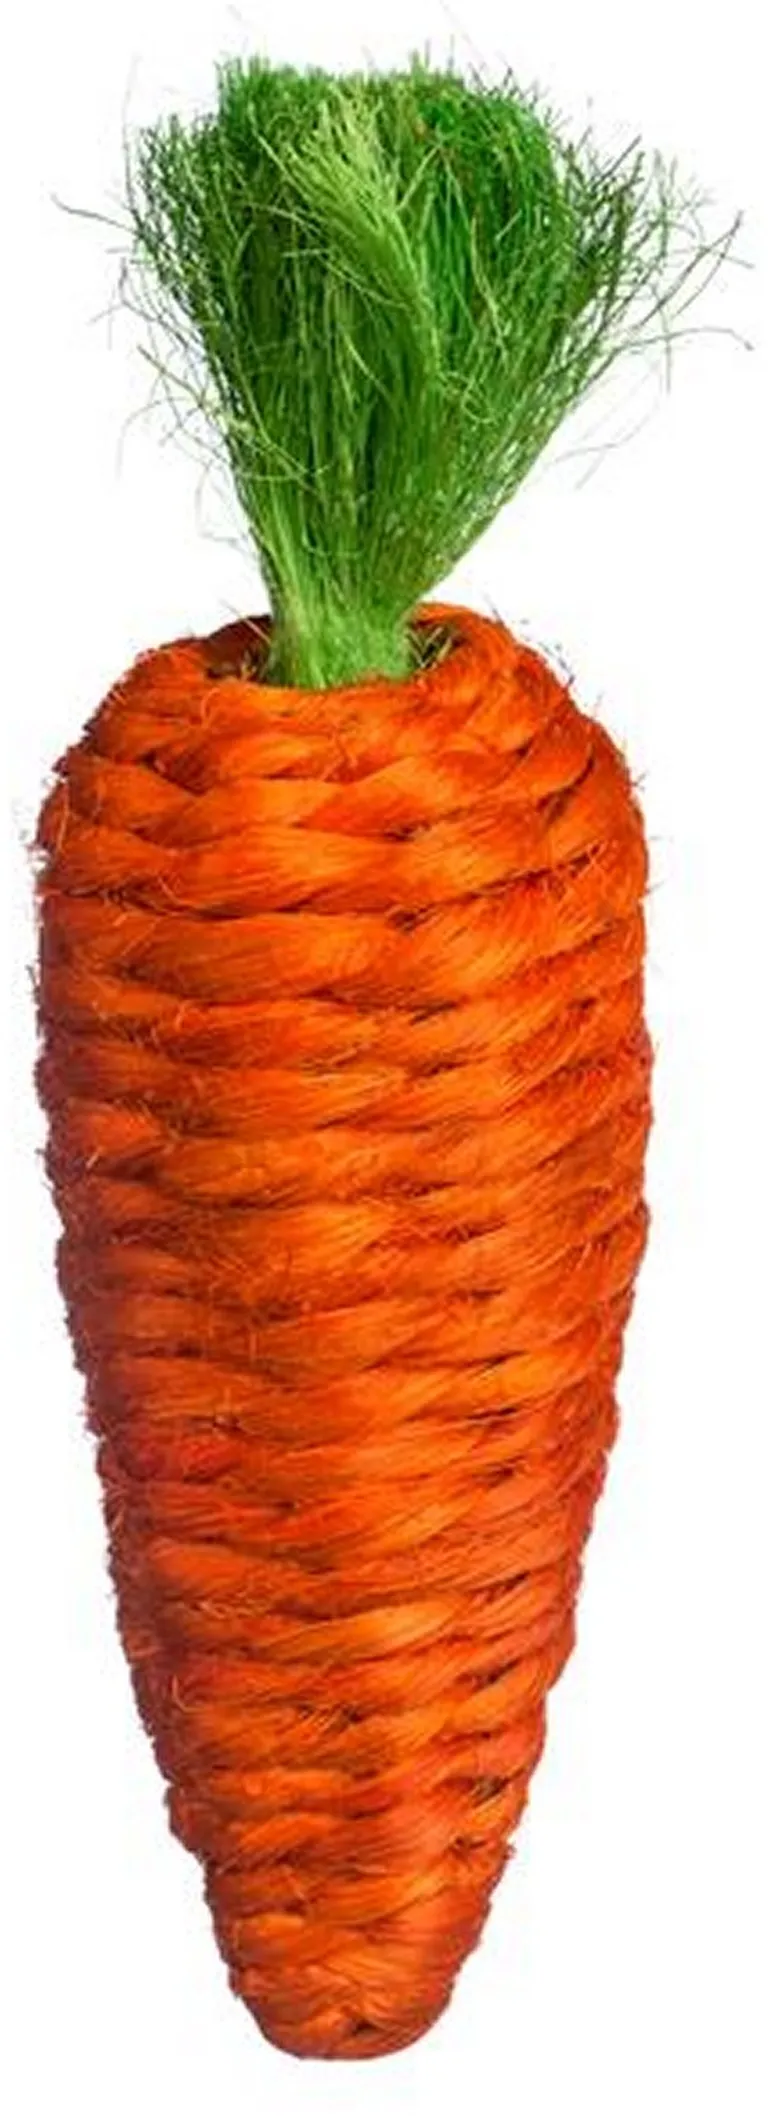 Prevue Pet Products Grassy Nibblers Carrot - 1082 Photo 1